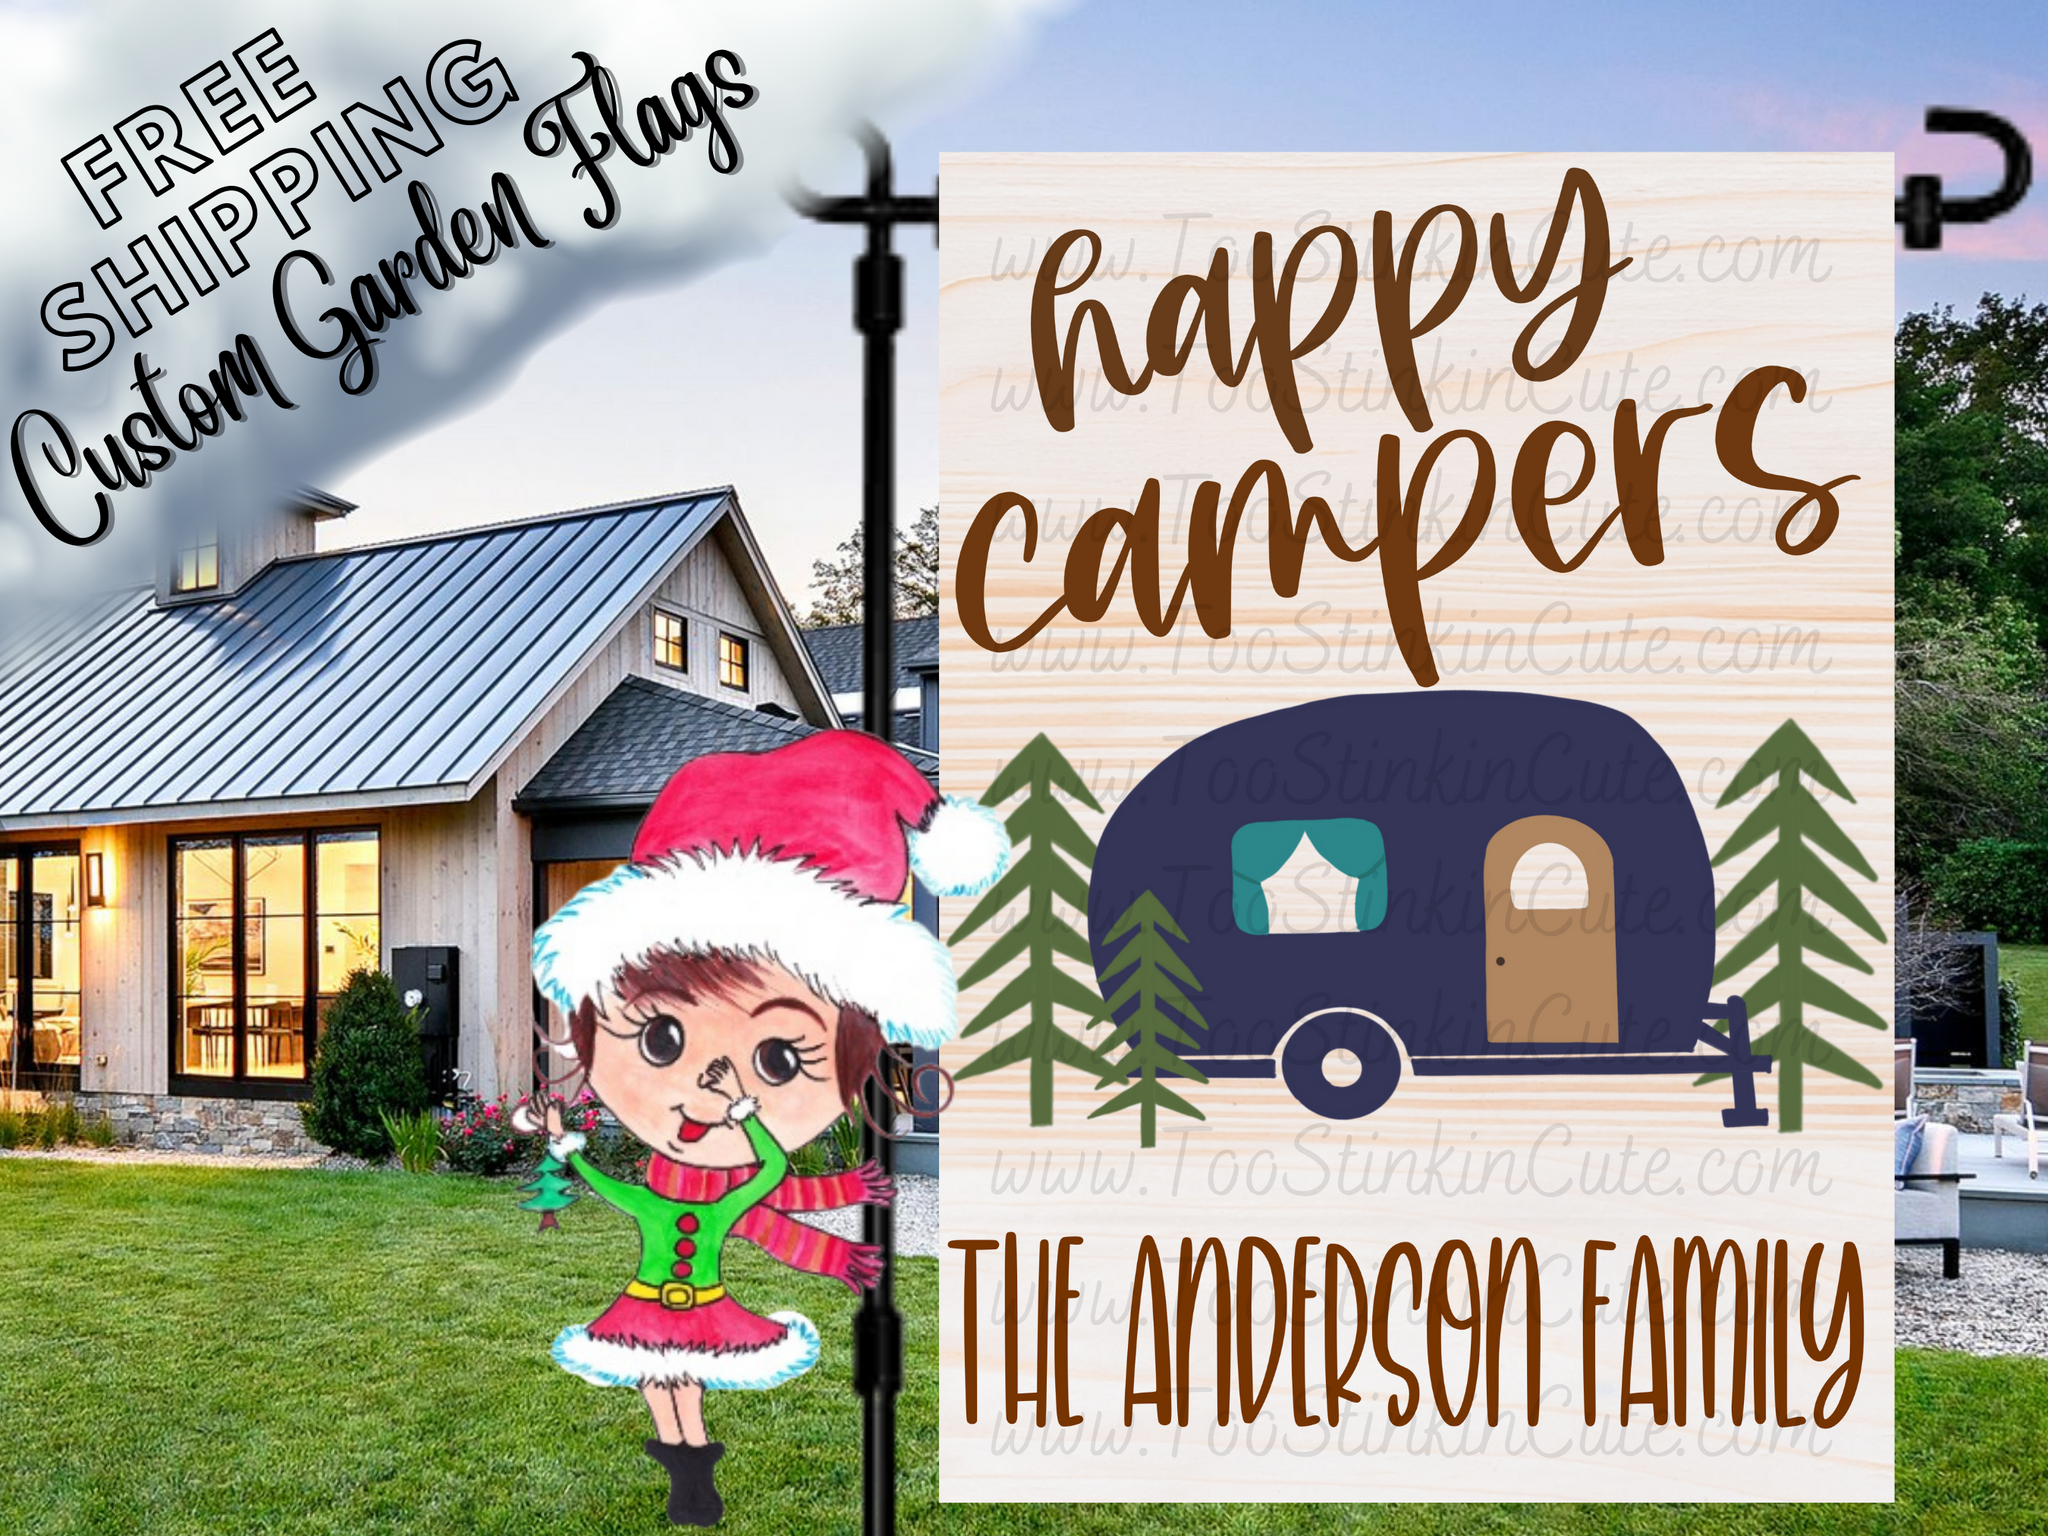 Happy Camper Personalized Garden Flag|Camping Flag|Campsite Flag|Camper Garden Flag|Happy Camper Garden Flag|Camper Mailbox Flag|Custom Flag